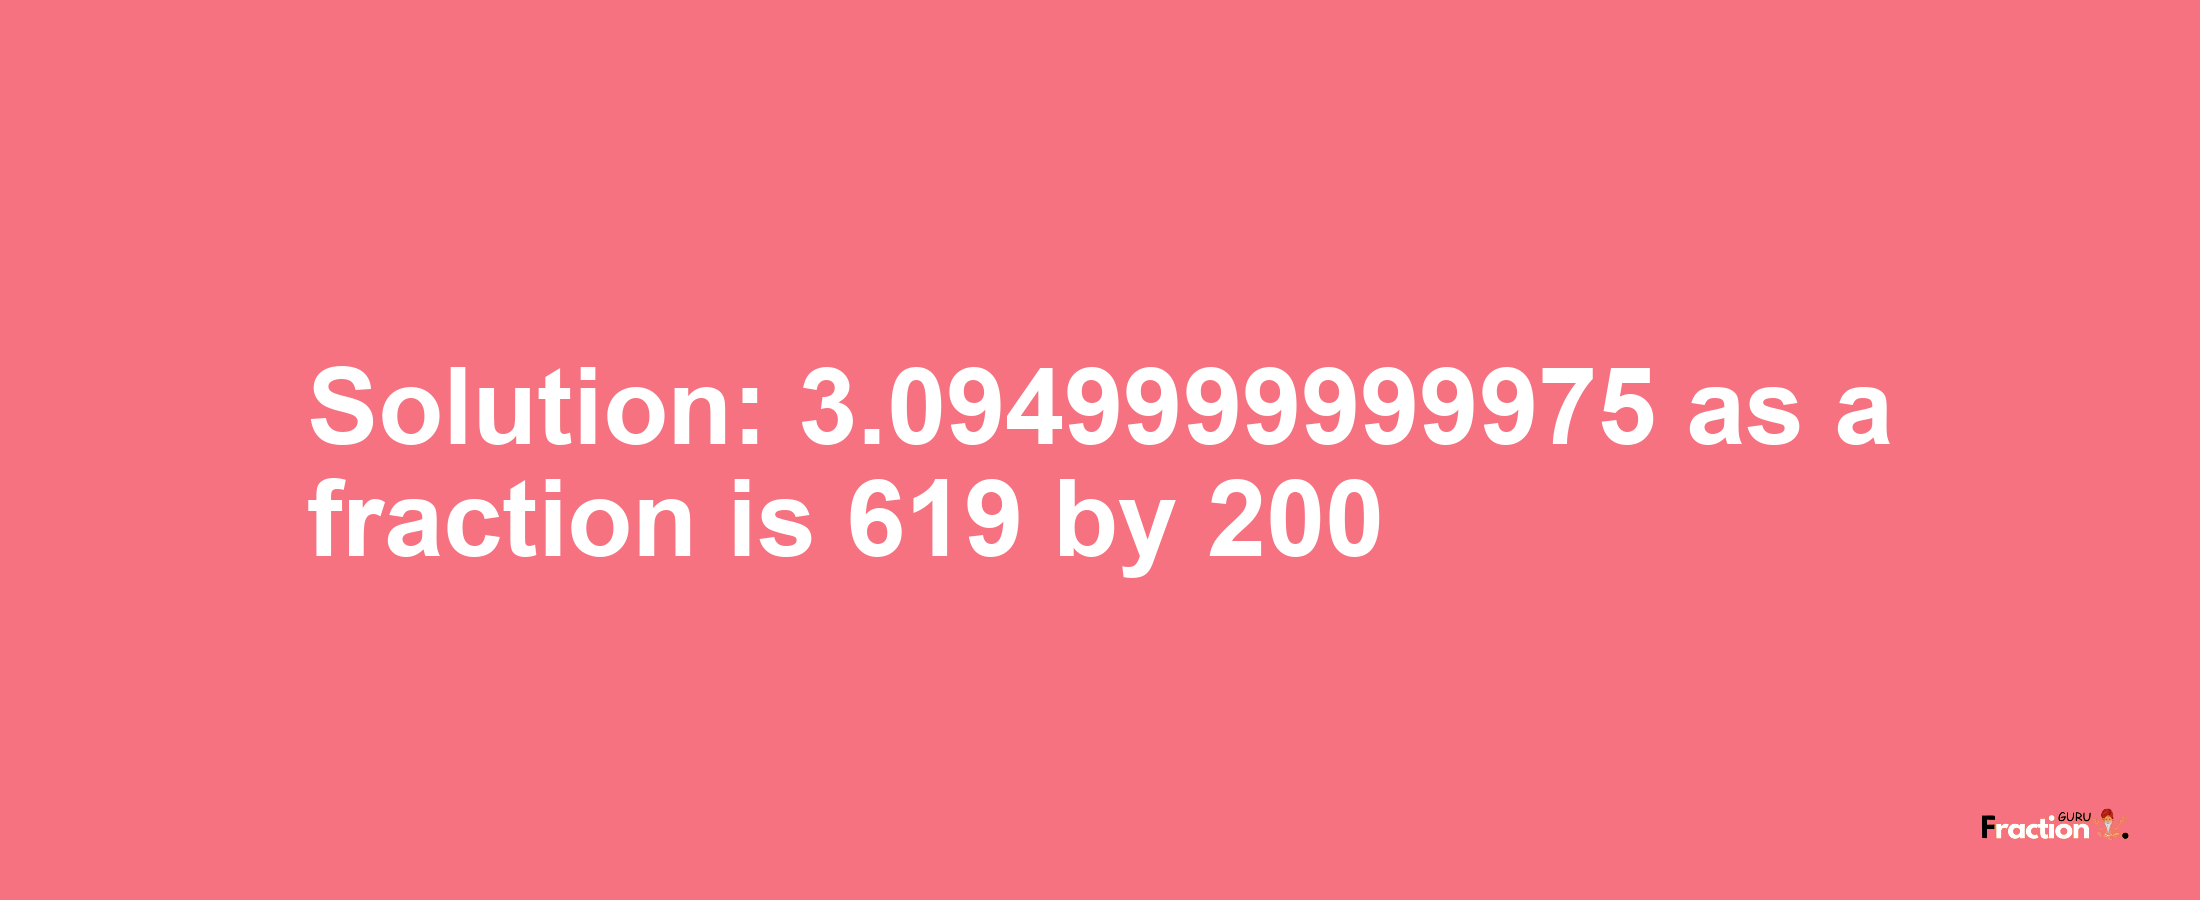 Solution:3.0949999999975 as a fraction is 619/200